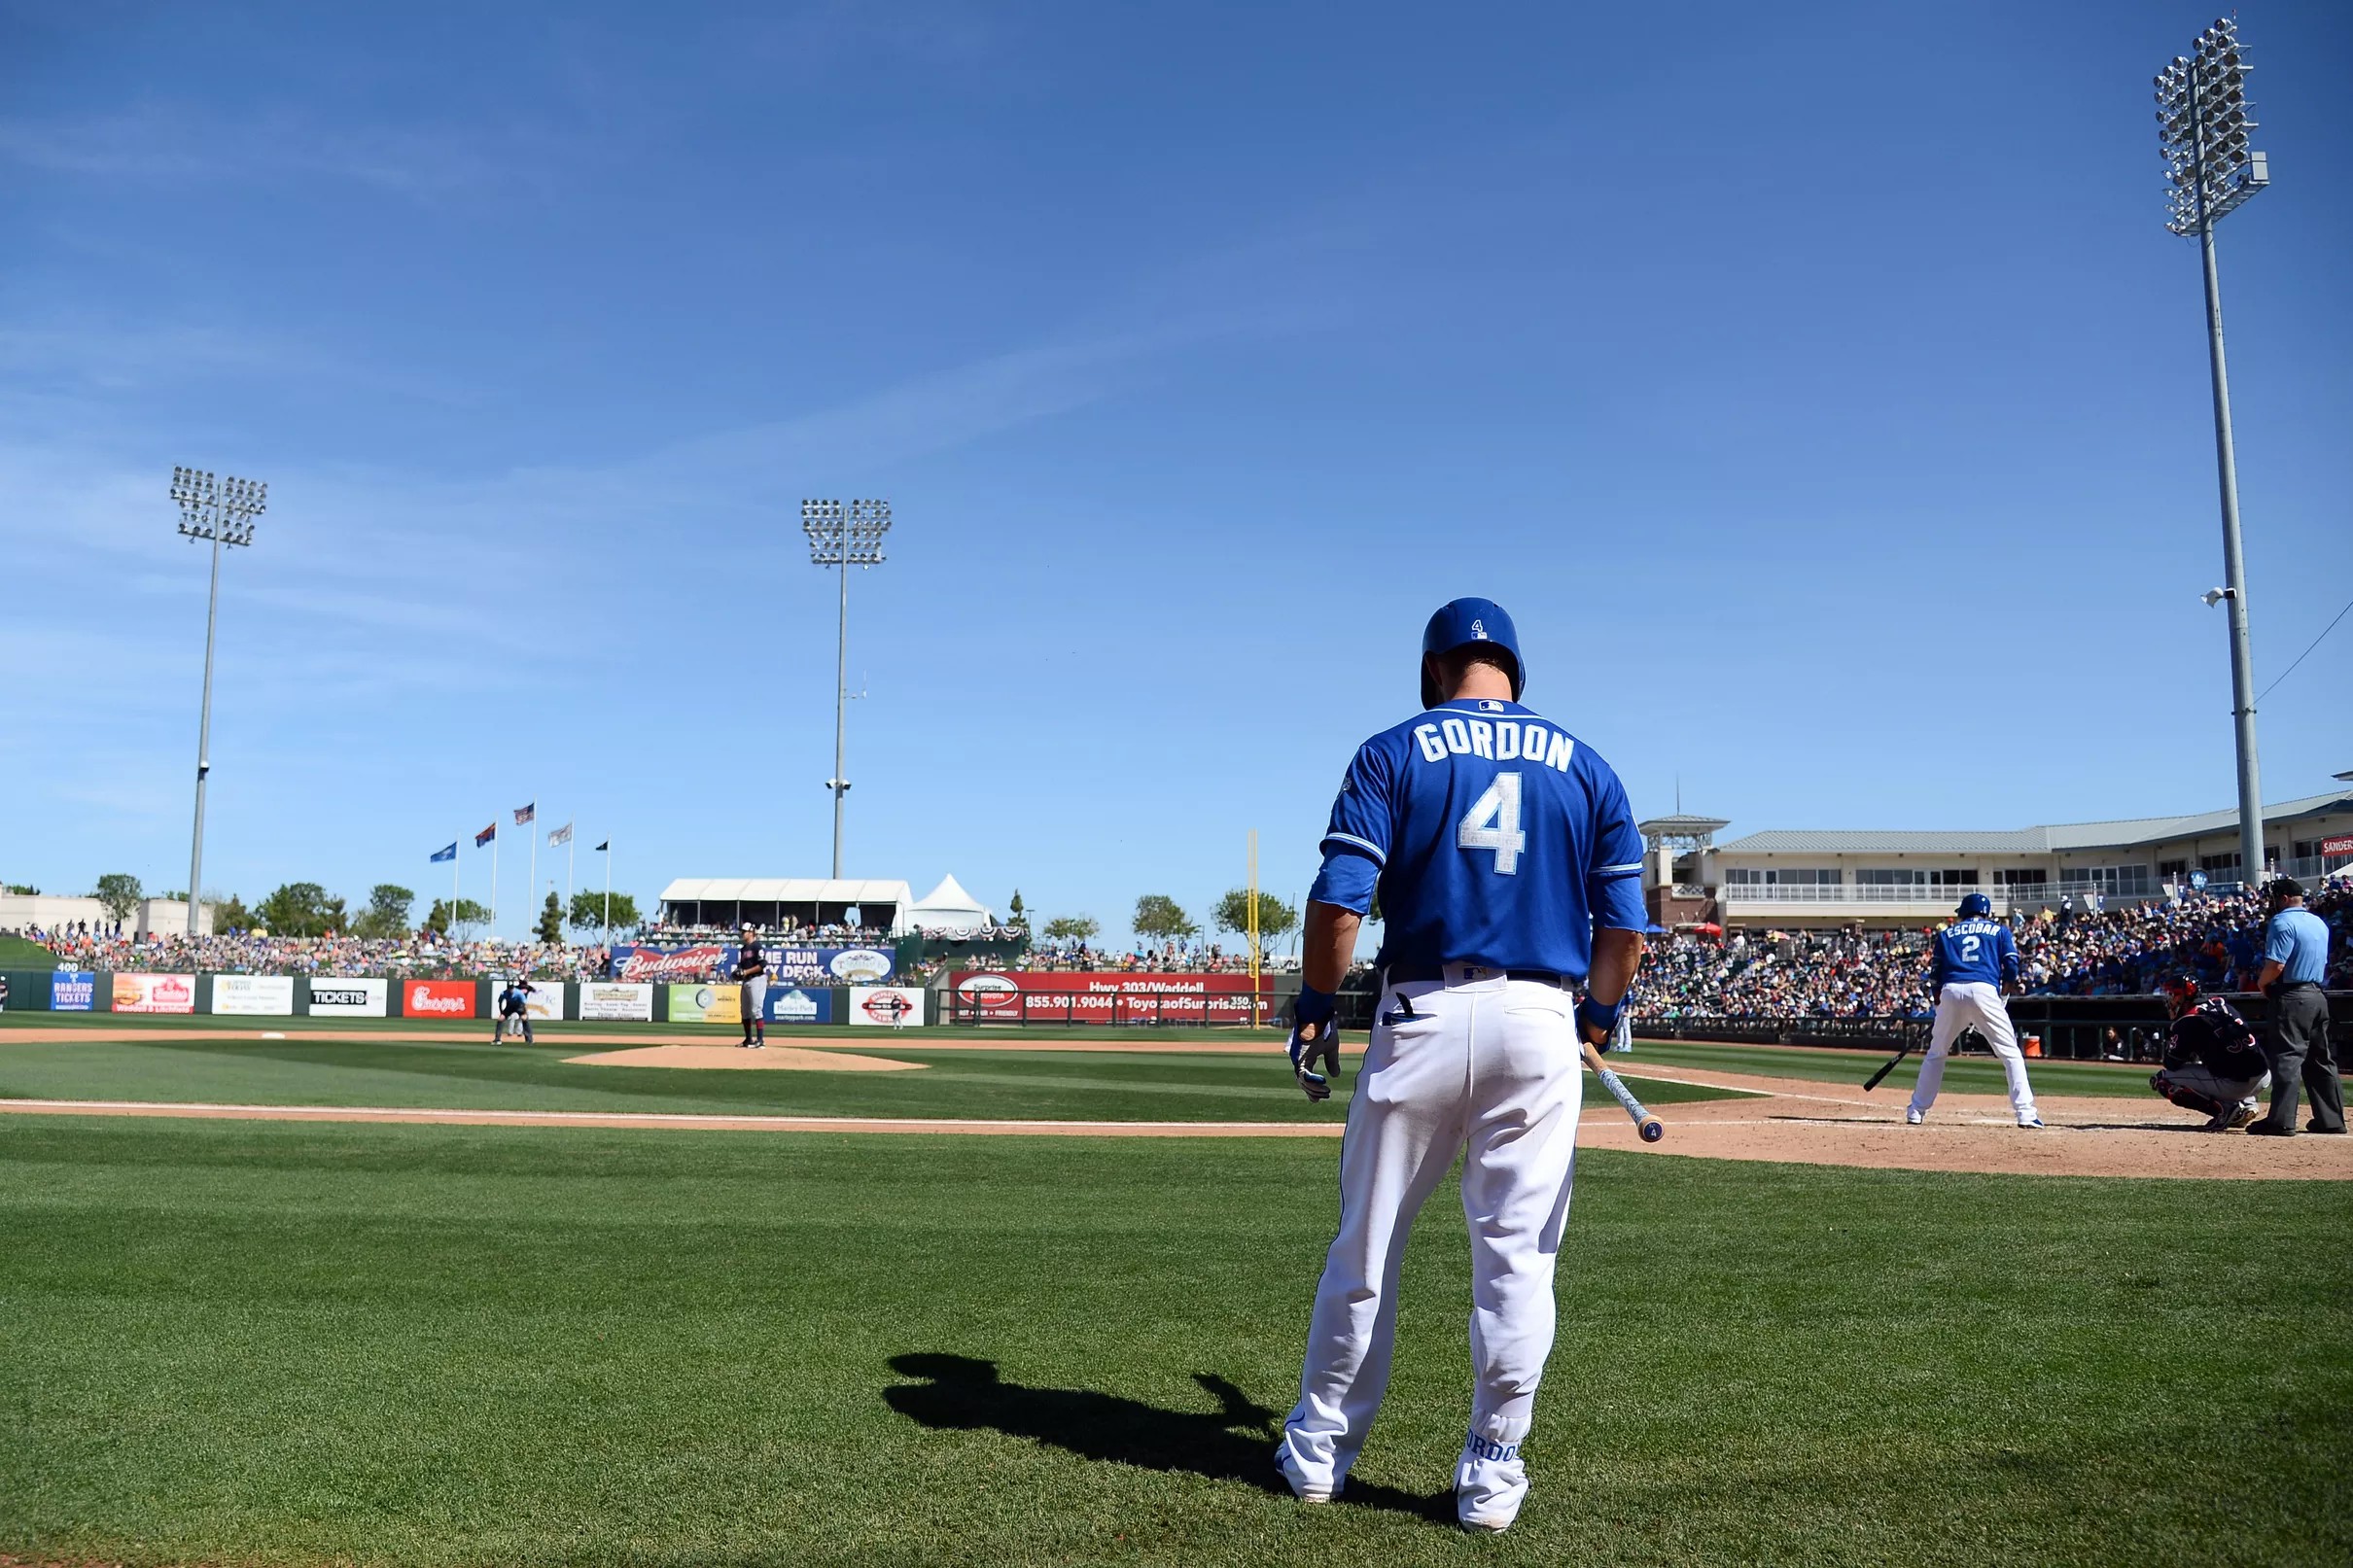 What to know about 2018 Royals spring training